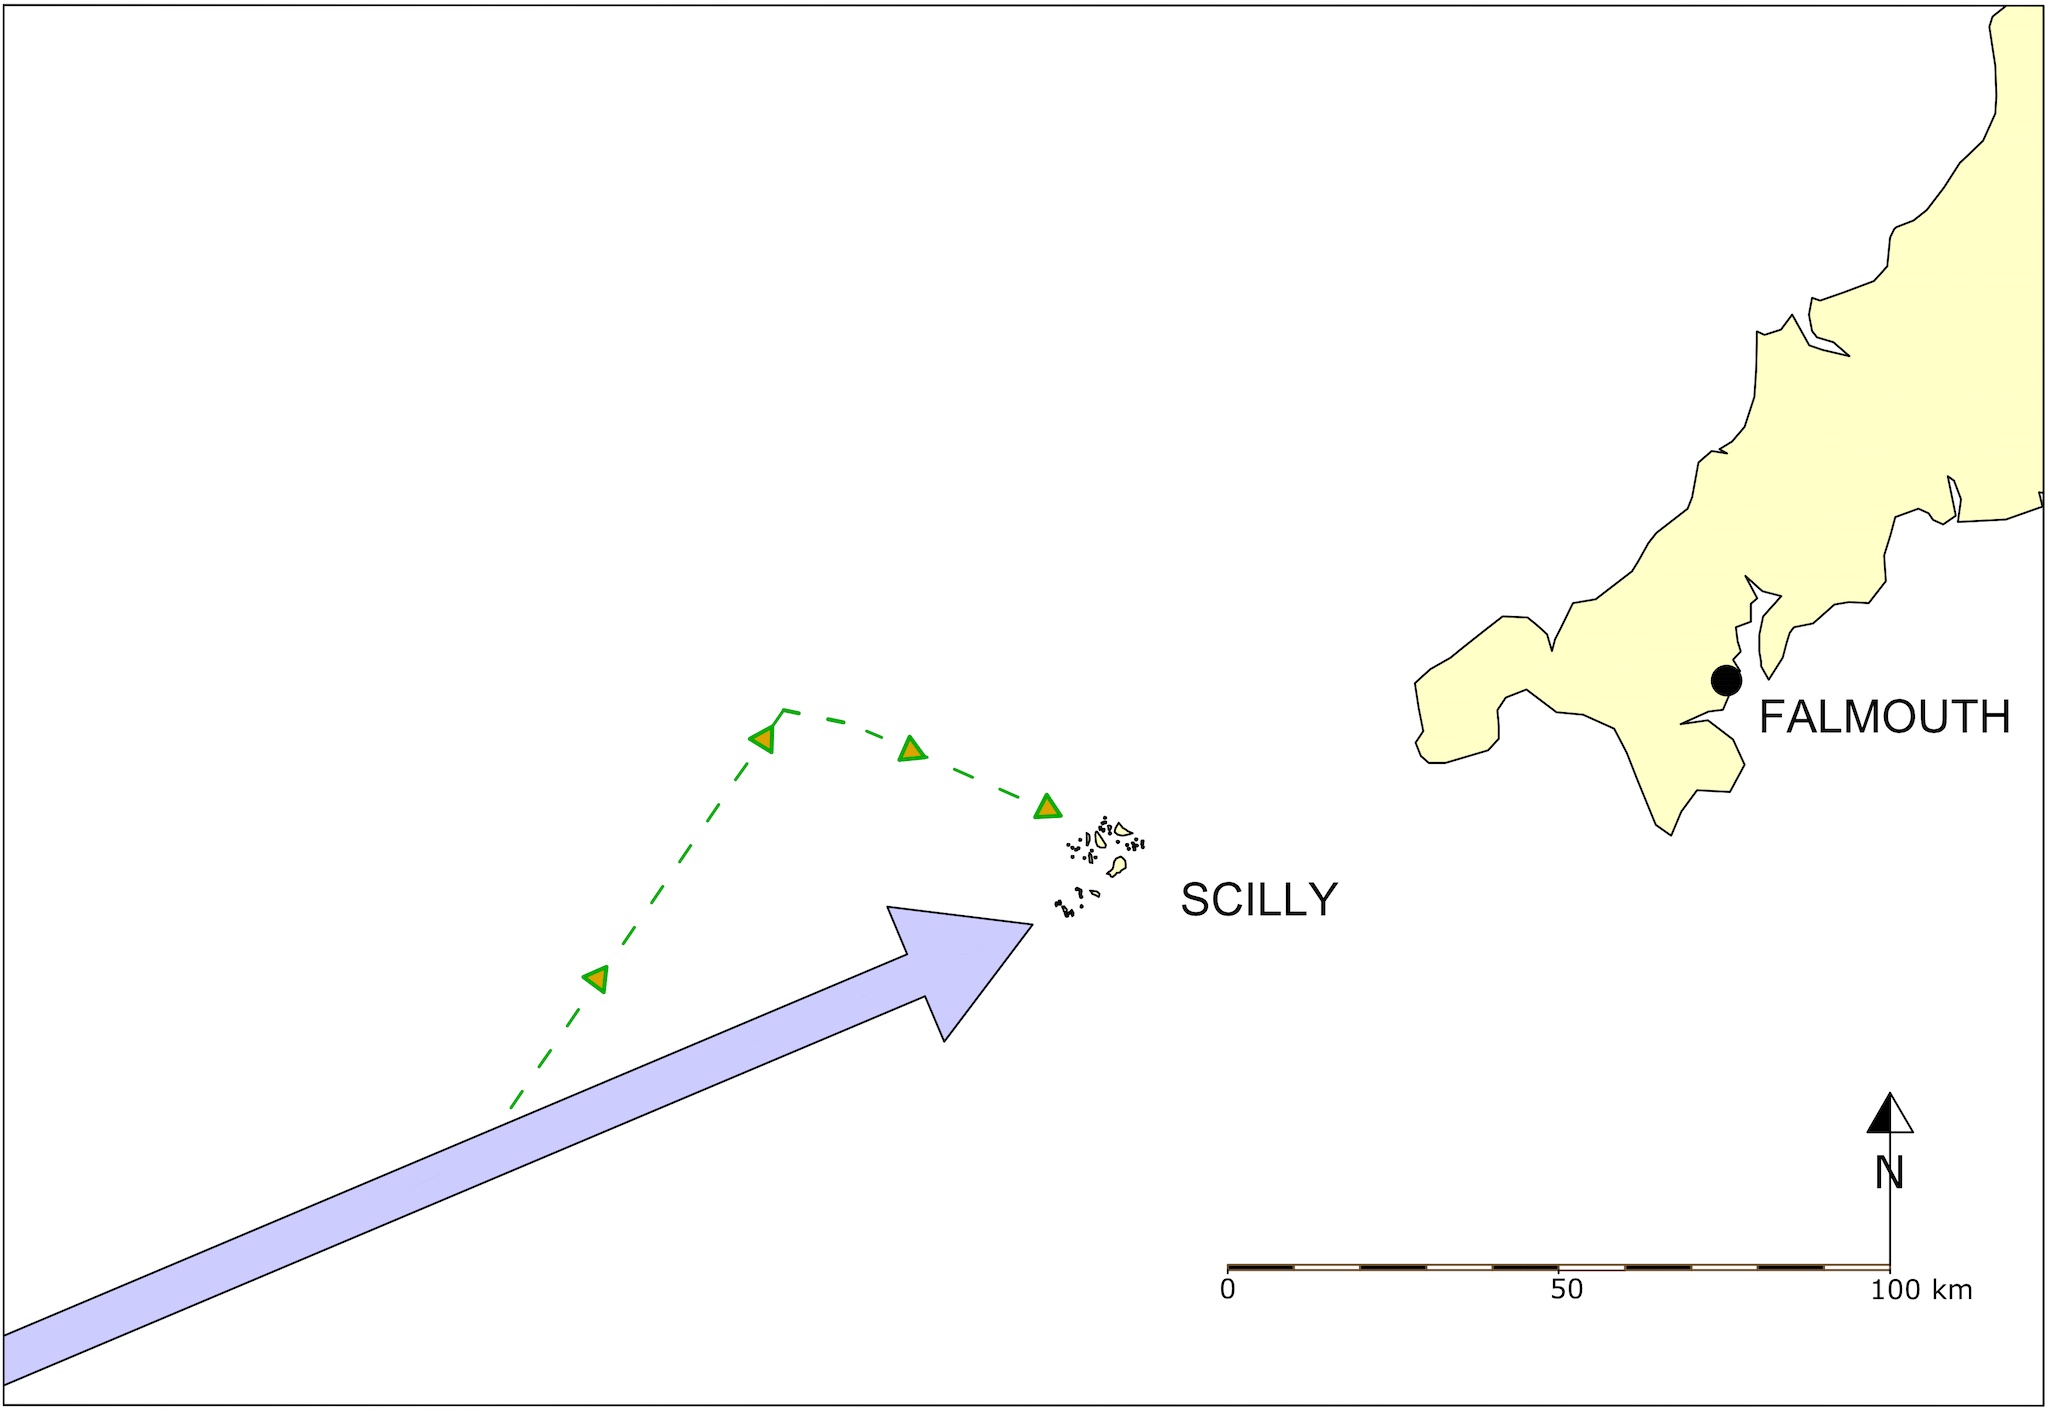 Map of the Isles of Scilly in relation to the Cornish mainland. Arrows on the map indicate the navigational errors - essentially that they thought they were further east than they were.